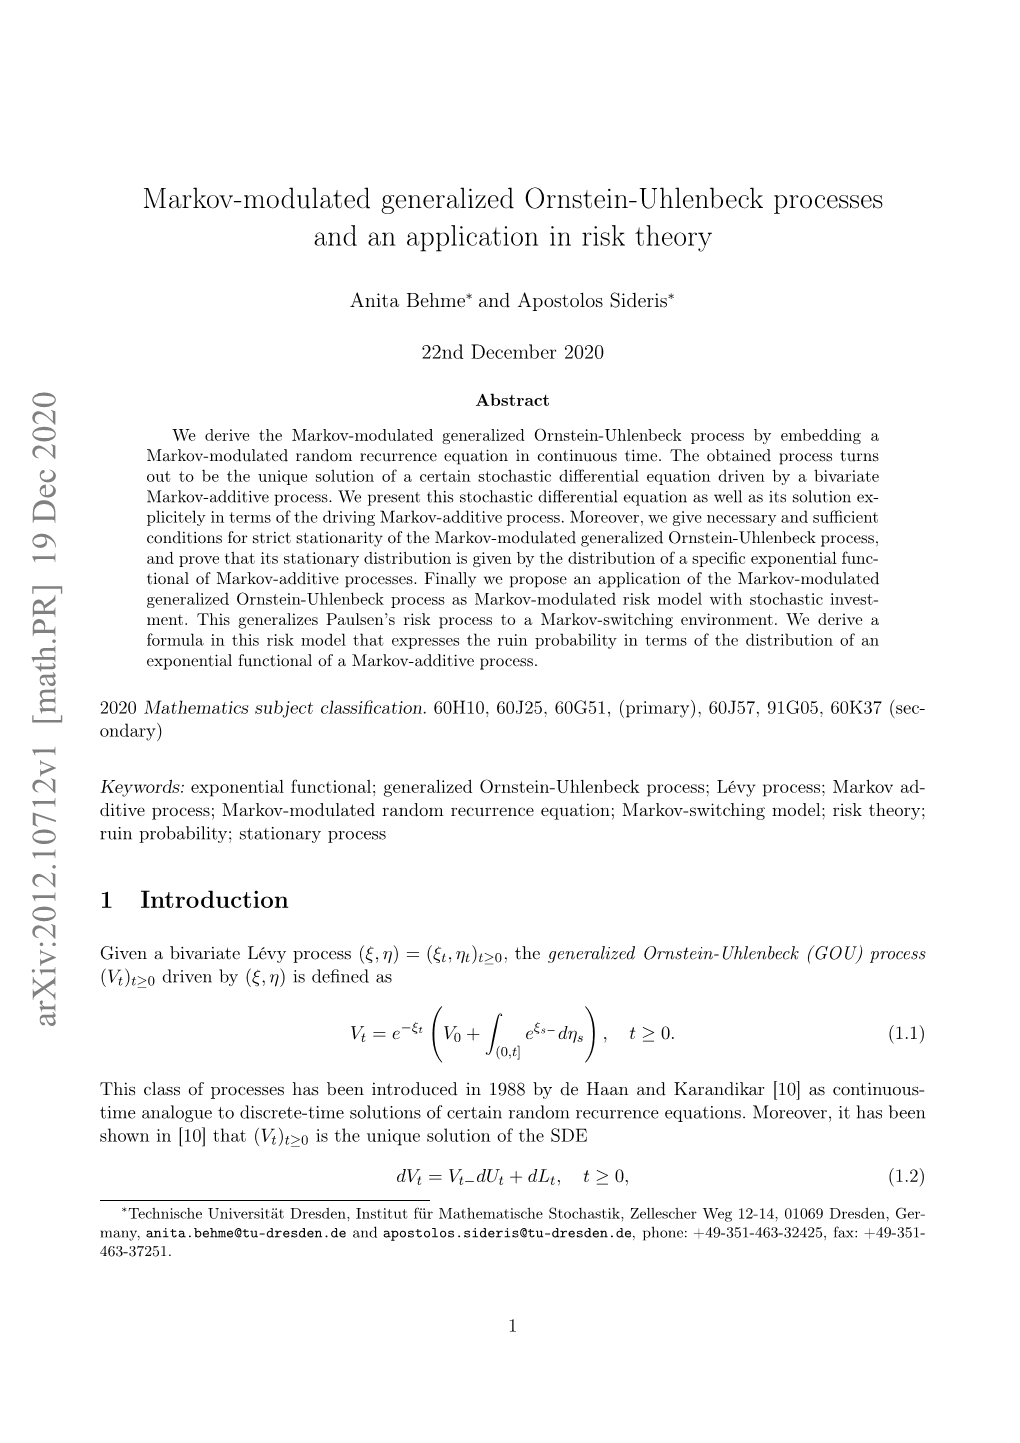 Markov-Modulated Generalized Ornstein-Uhlenbeck Processes And